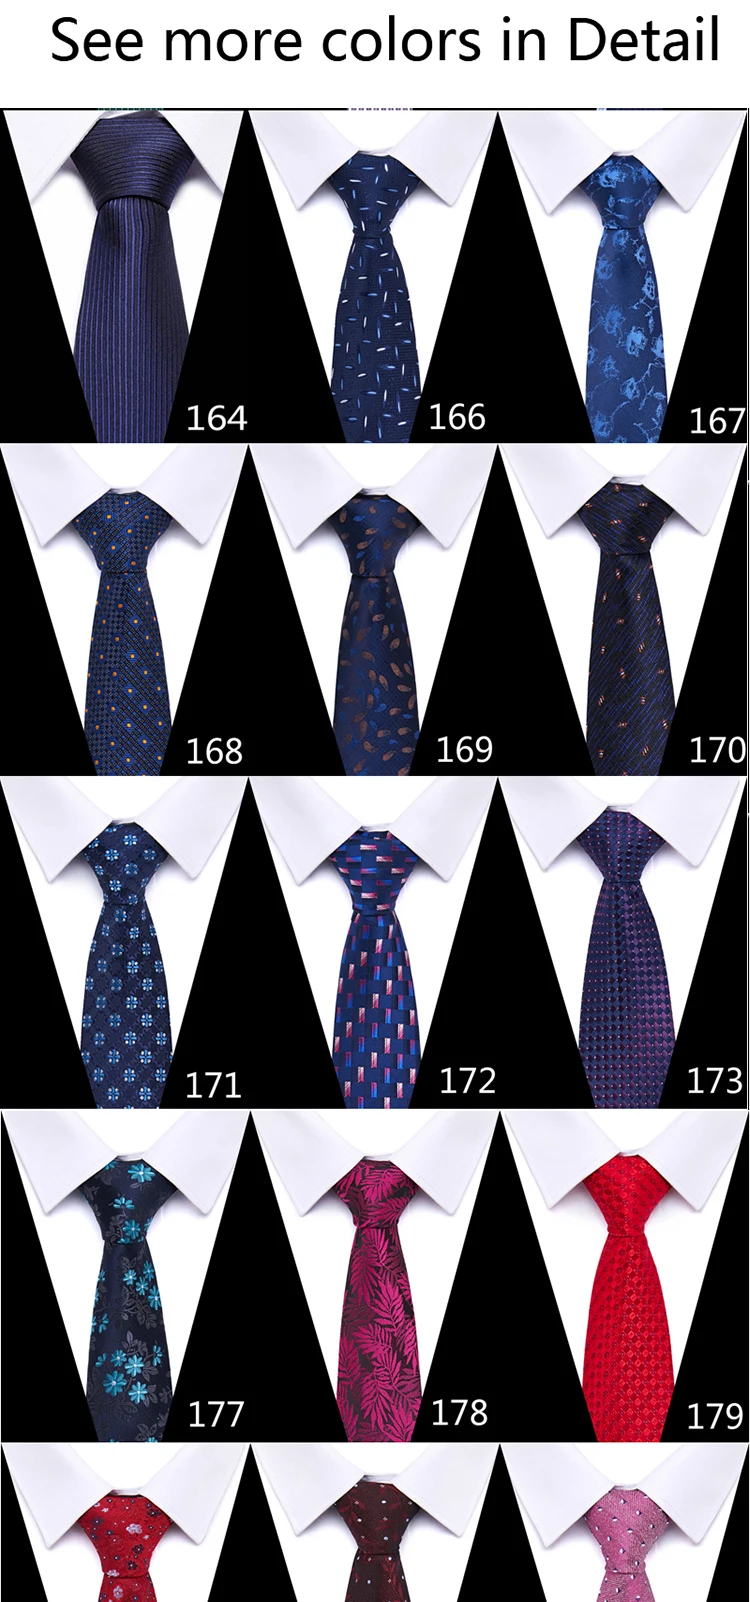 

High Quality Nice Handmade Vangise Brand Wholesale Hot sale 7.5 cm Silk Necktie Plaid Man's Dropshipping Fit Group